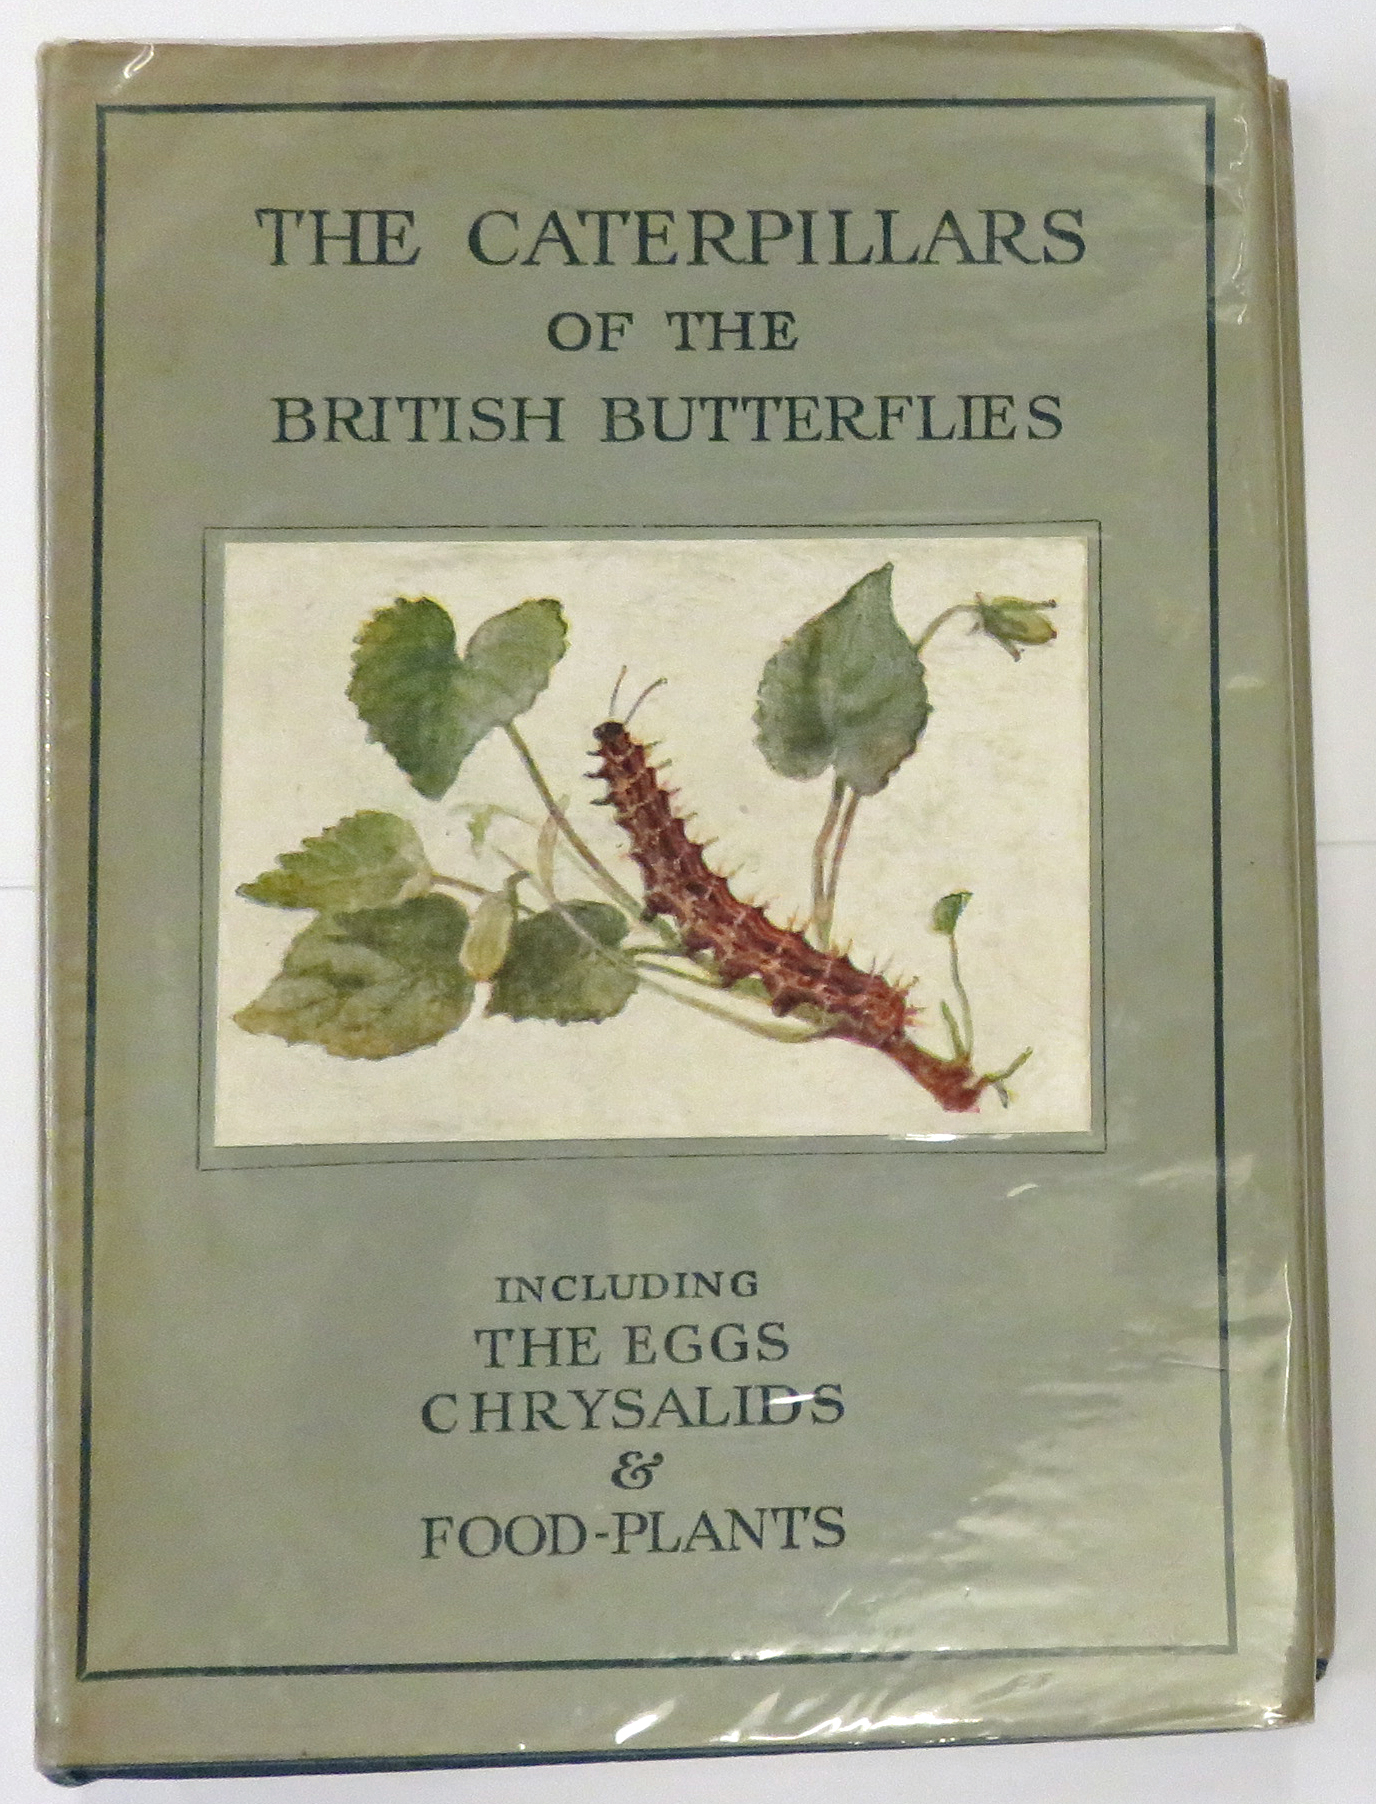 The Wayside And Woodland Series The Caterpillars Of The British Butterflies